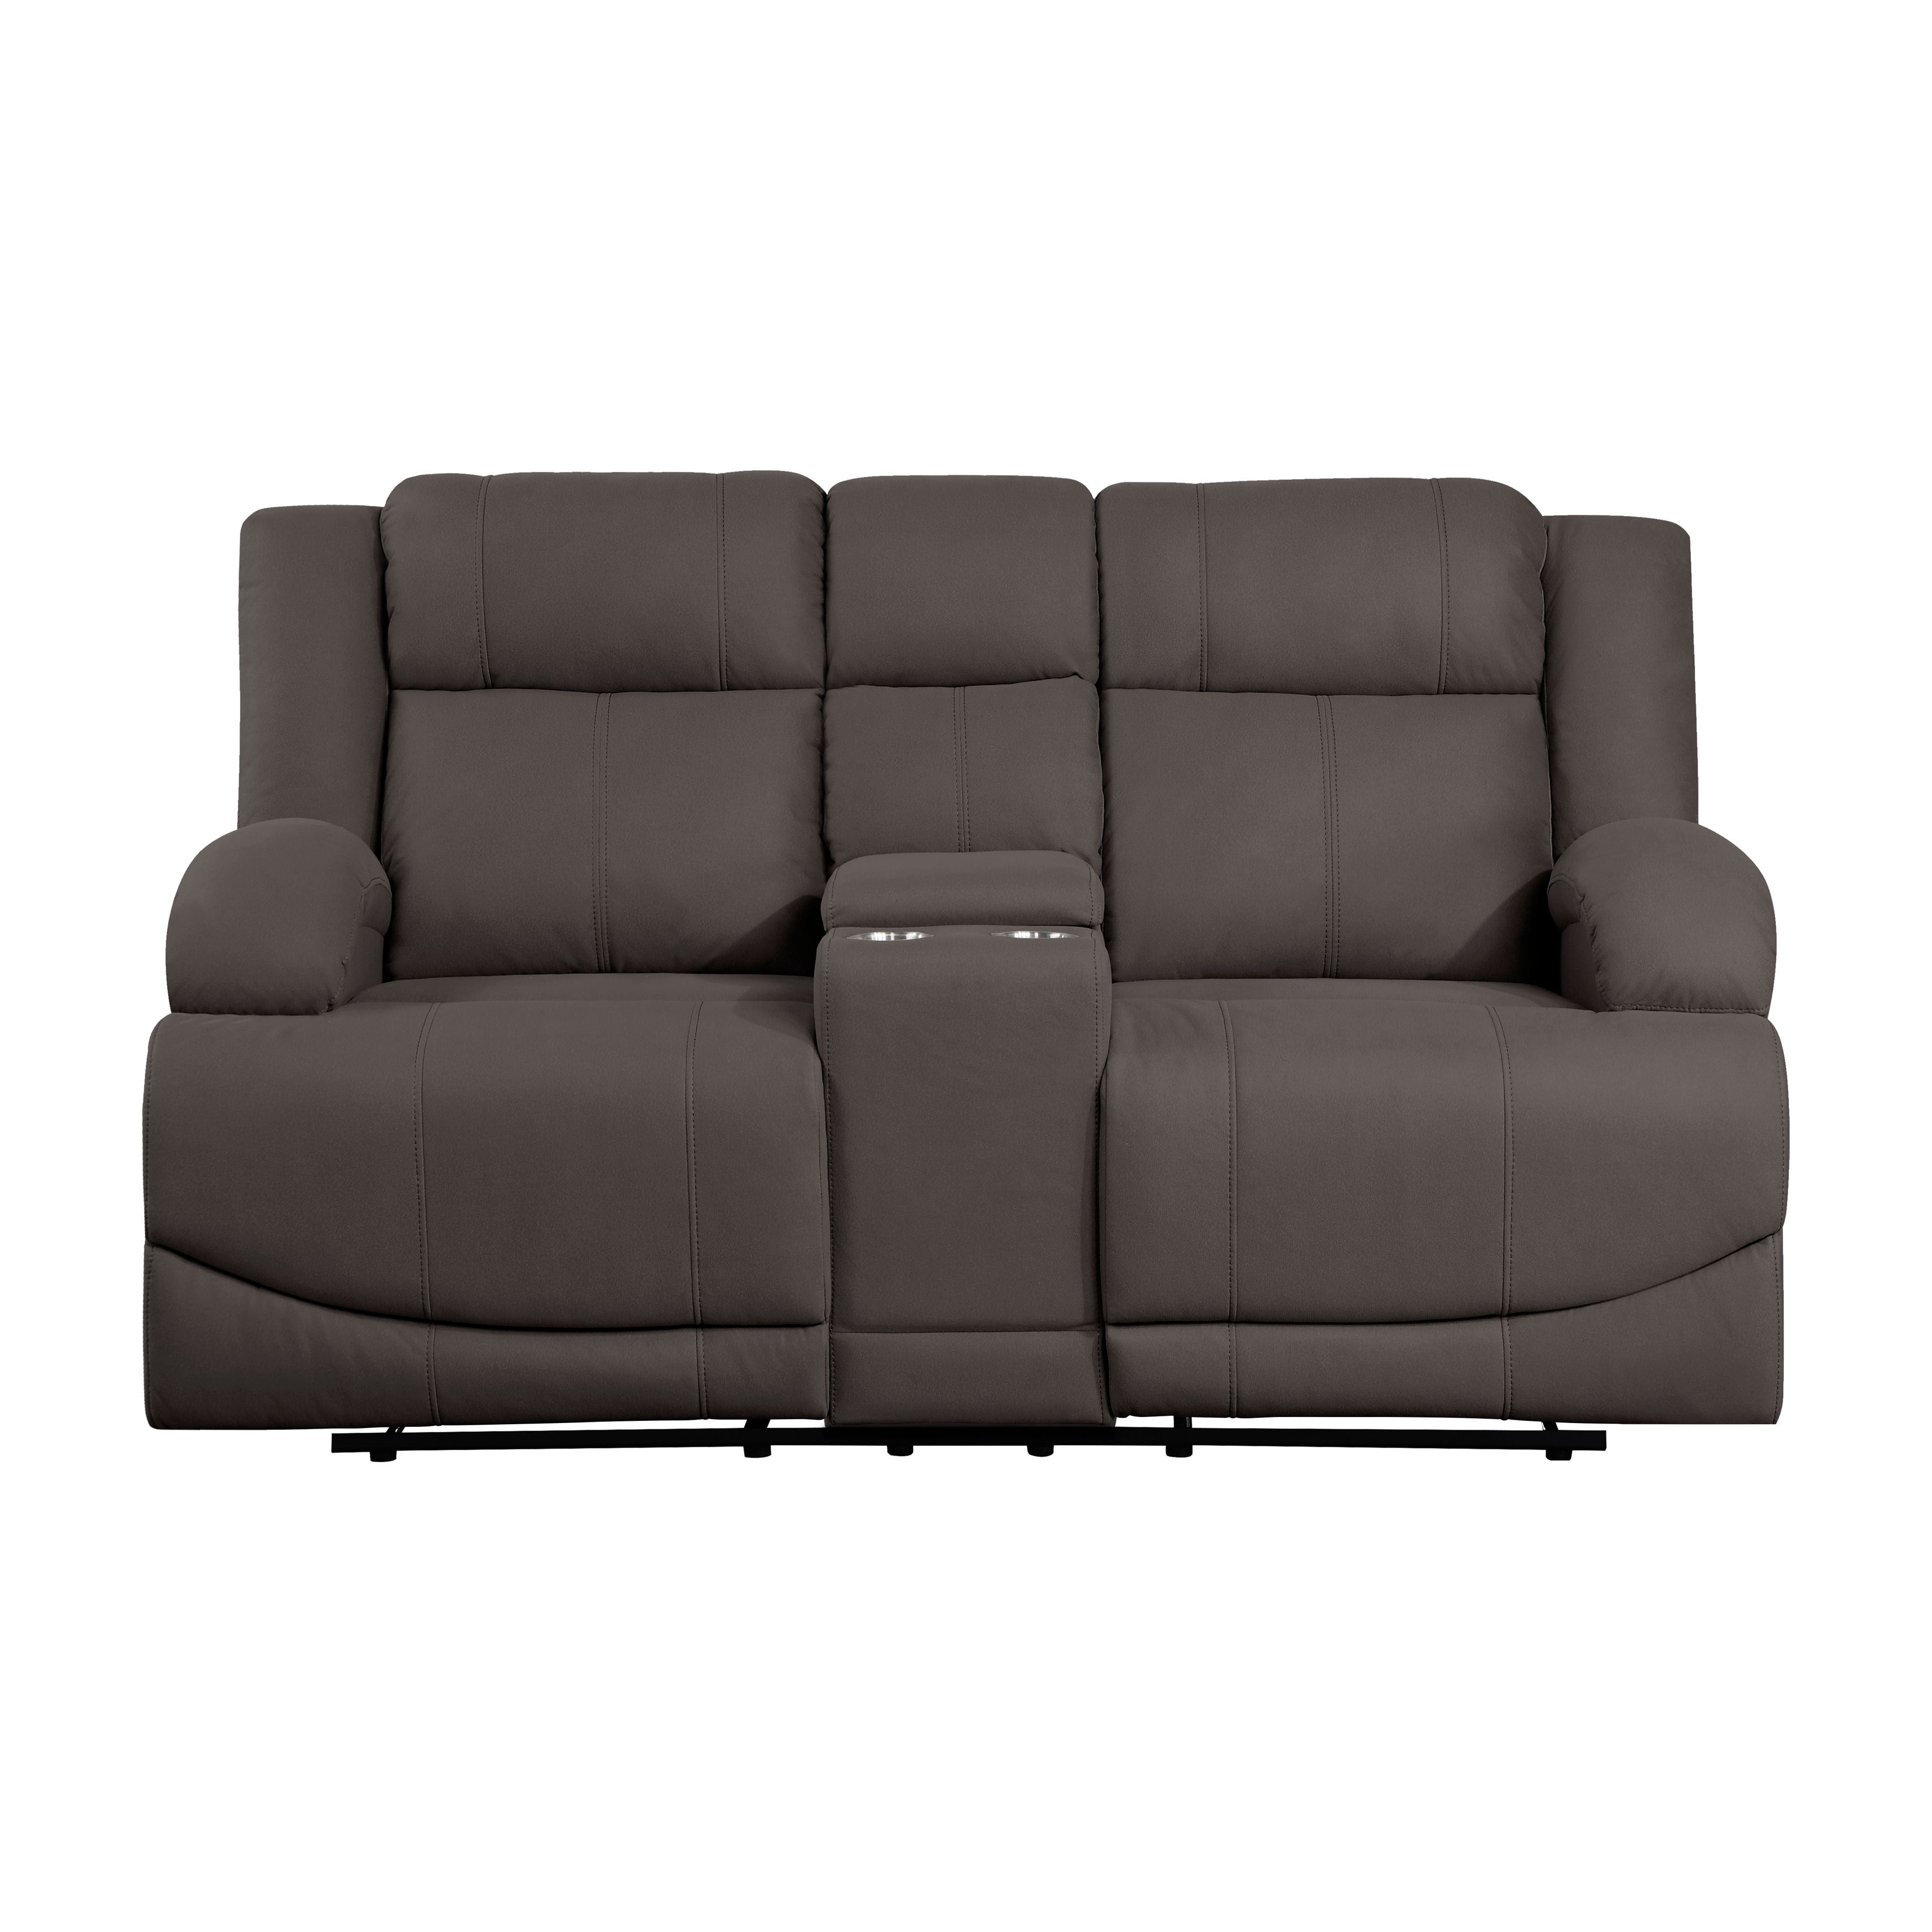 Chocolate Color Microfiber Upholstered 1 Piece Double Reclining Loveseat With Center Console Transitional Living Room Furniture